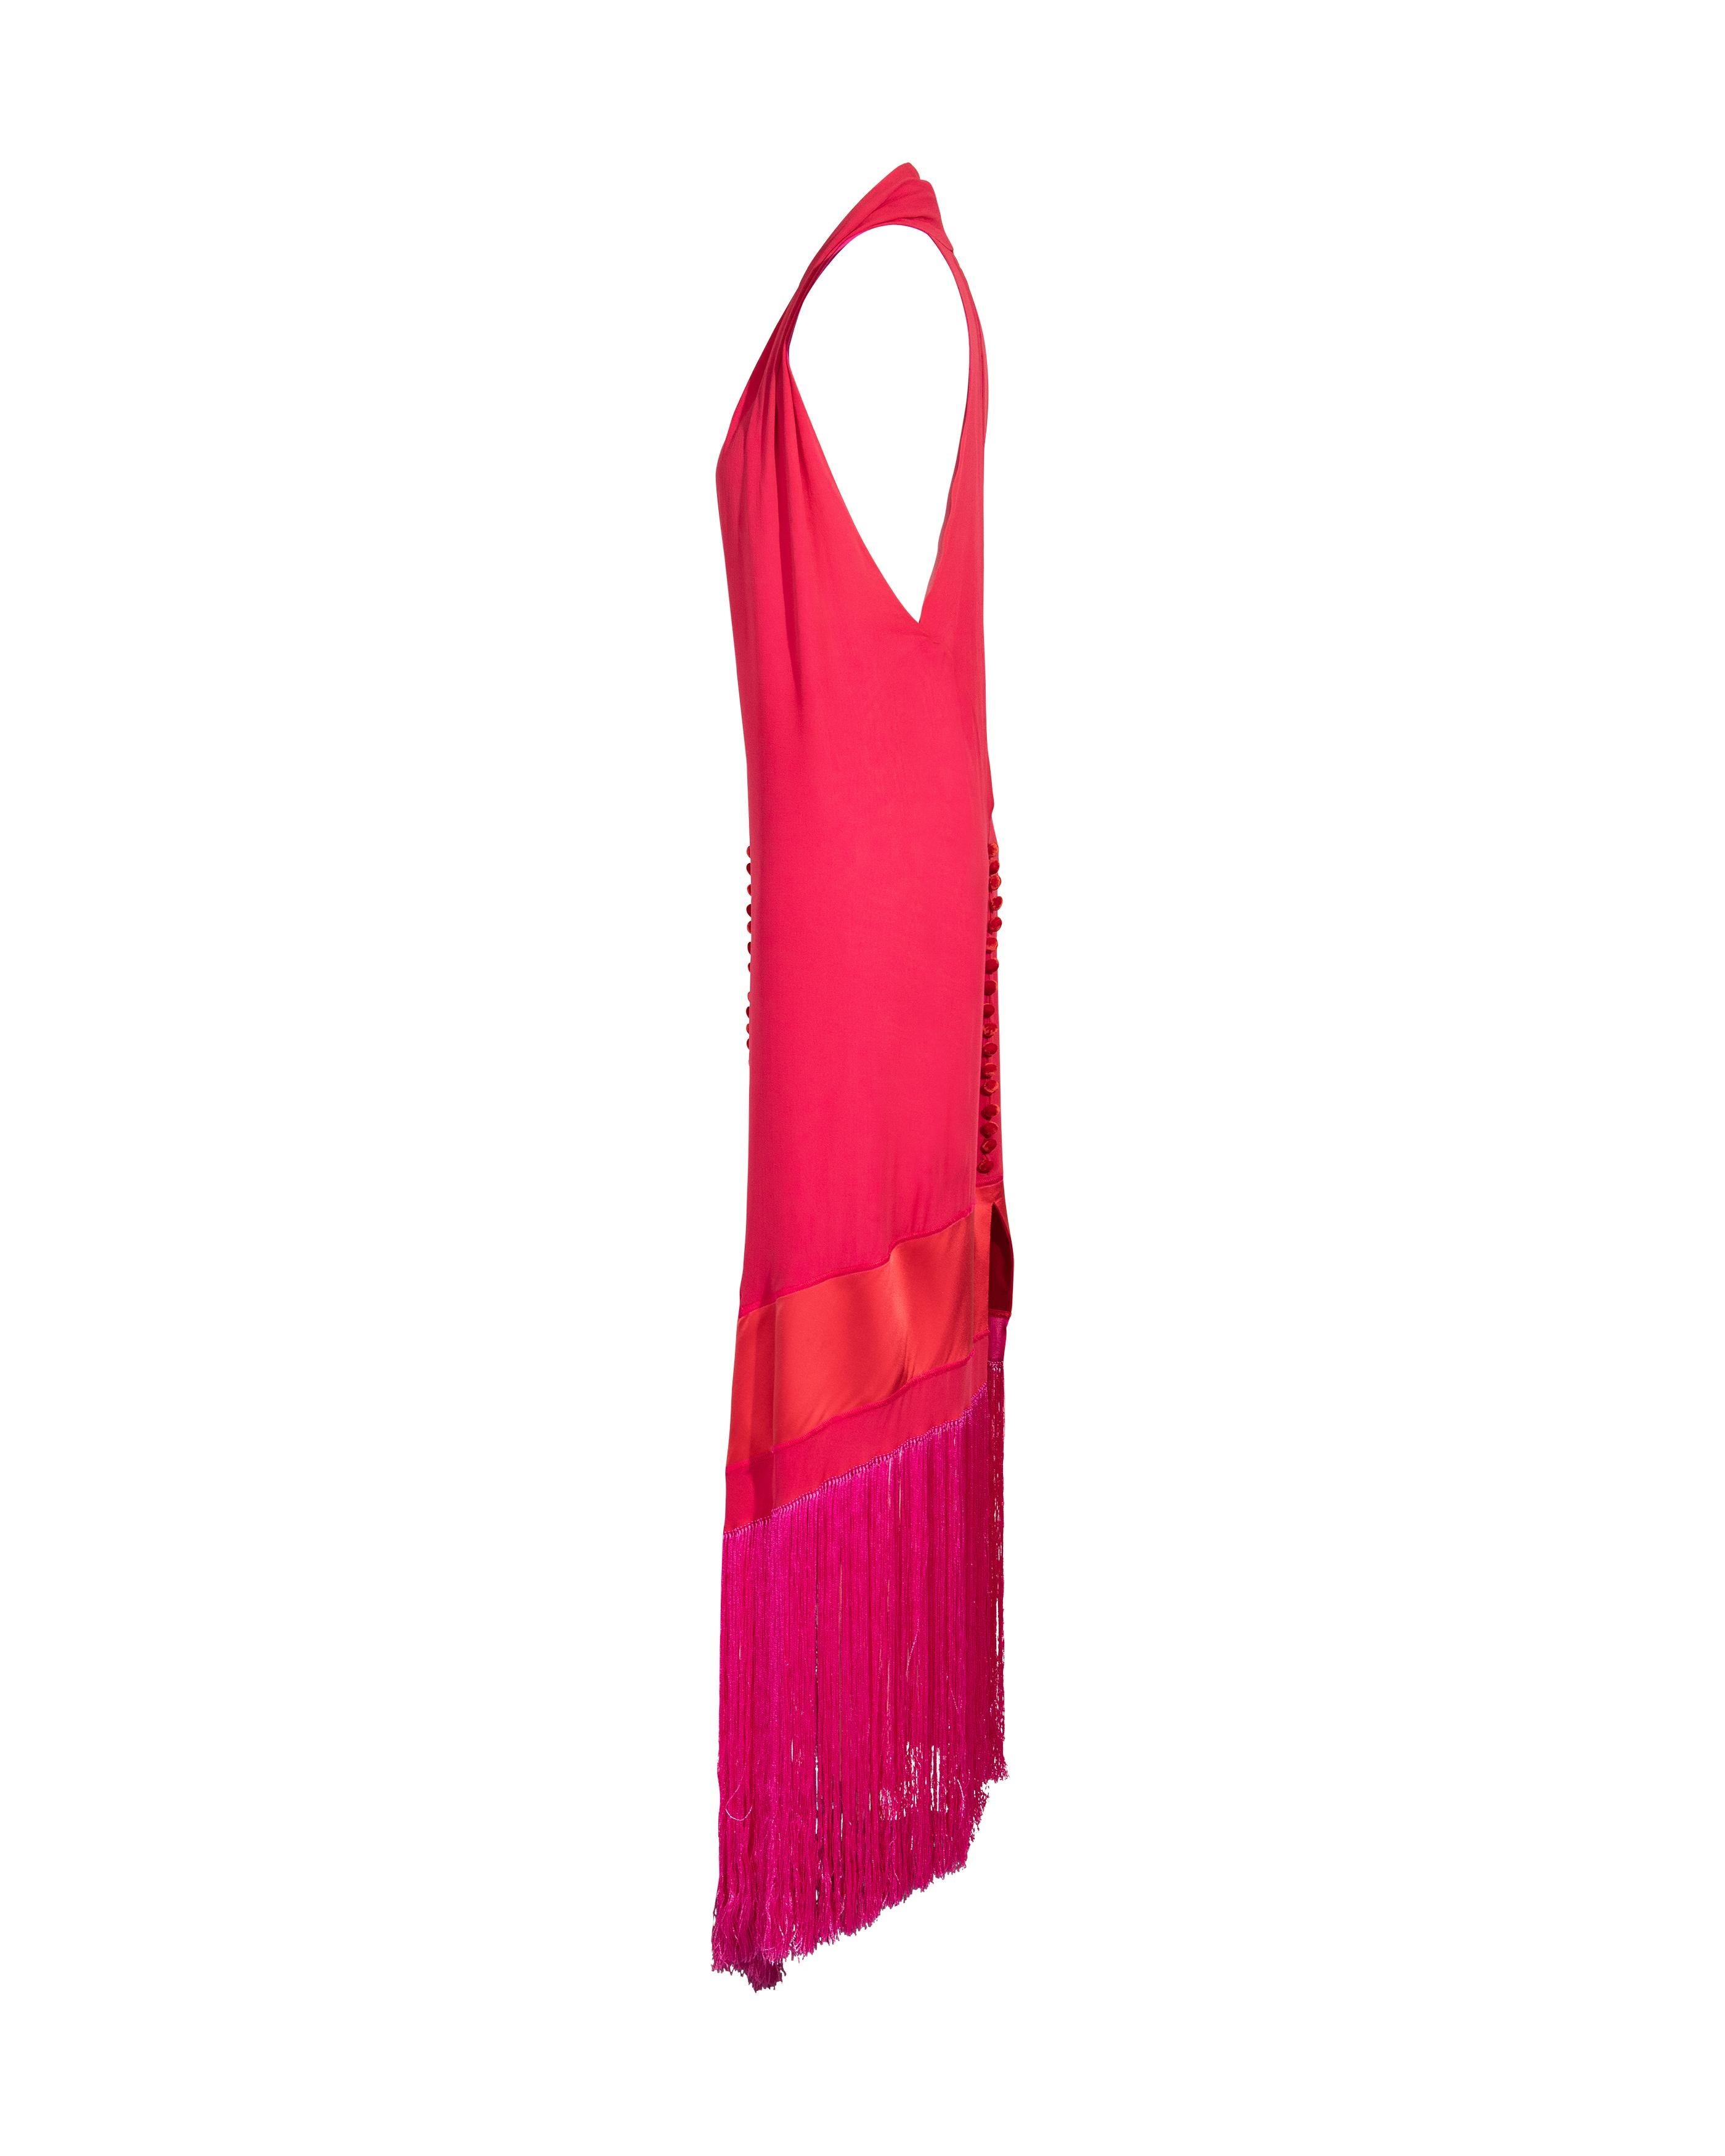 1980's Gianfranco Ferre (attributed) red silk midi dress with hot pink fringe. Red silk chiffon dress with long hot pink fringe hem. Features oversized red velvet buttons on back and front. Deep halter neckline with open cutout back. Asymmetrical